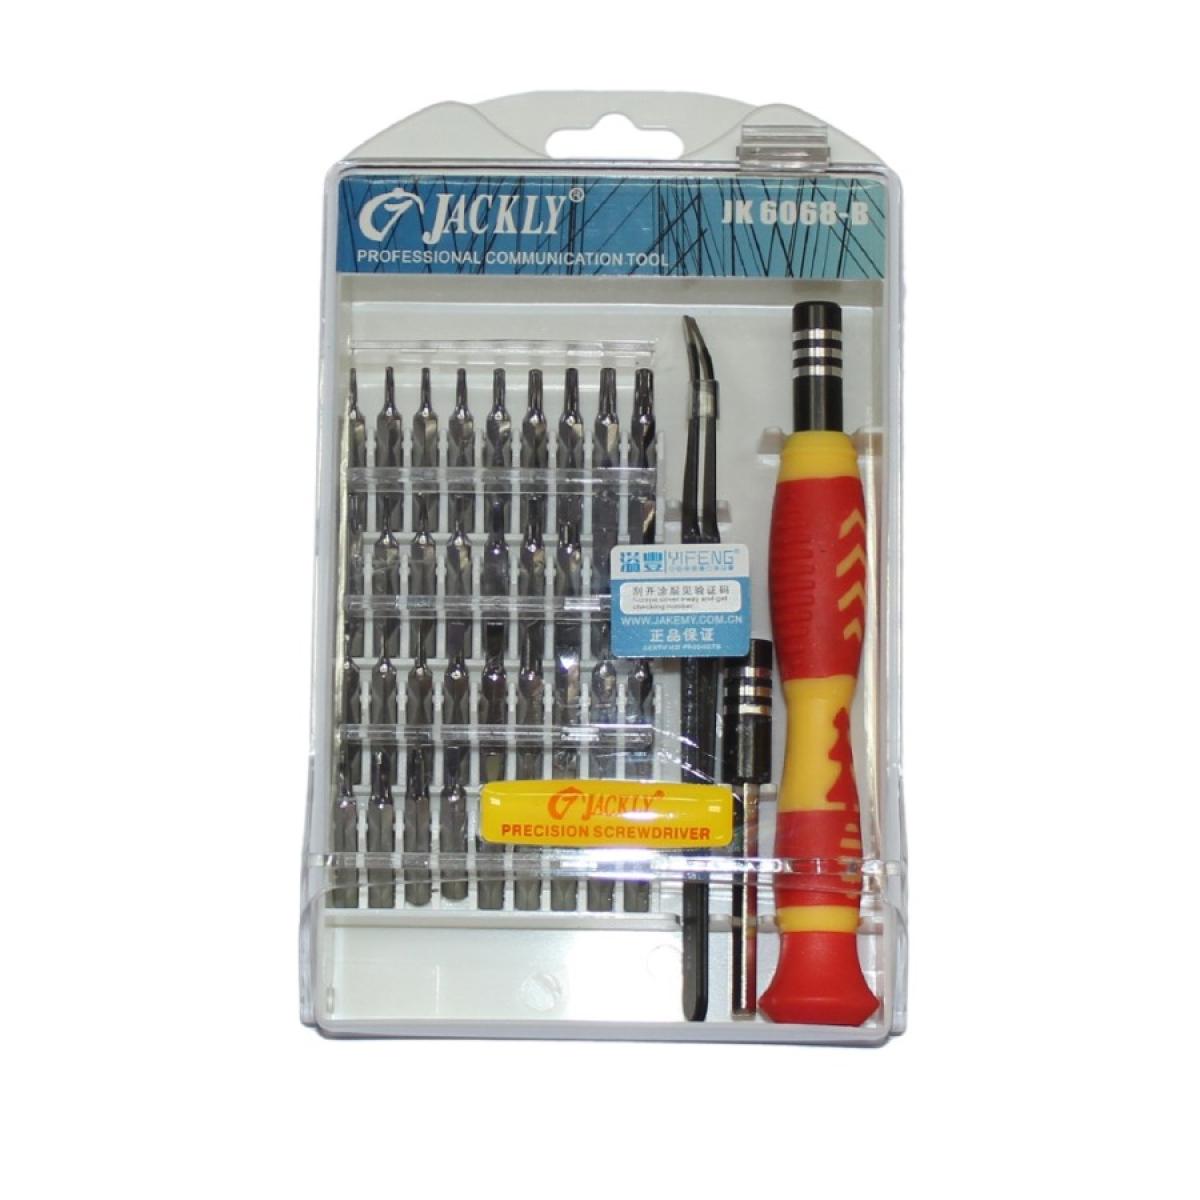 JAKEMY JK-6068-B 39 In 1 Jackly 6068 B Combination Screwdriver Set For Carpentry Tools